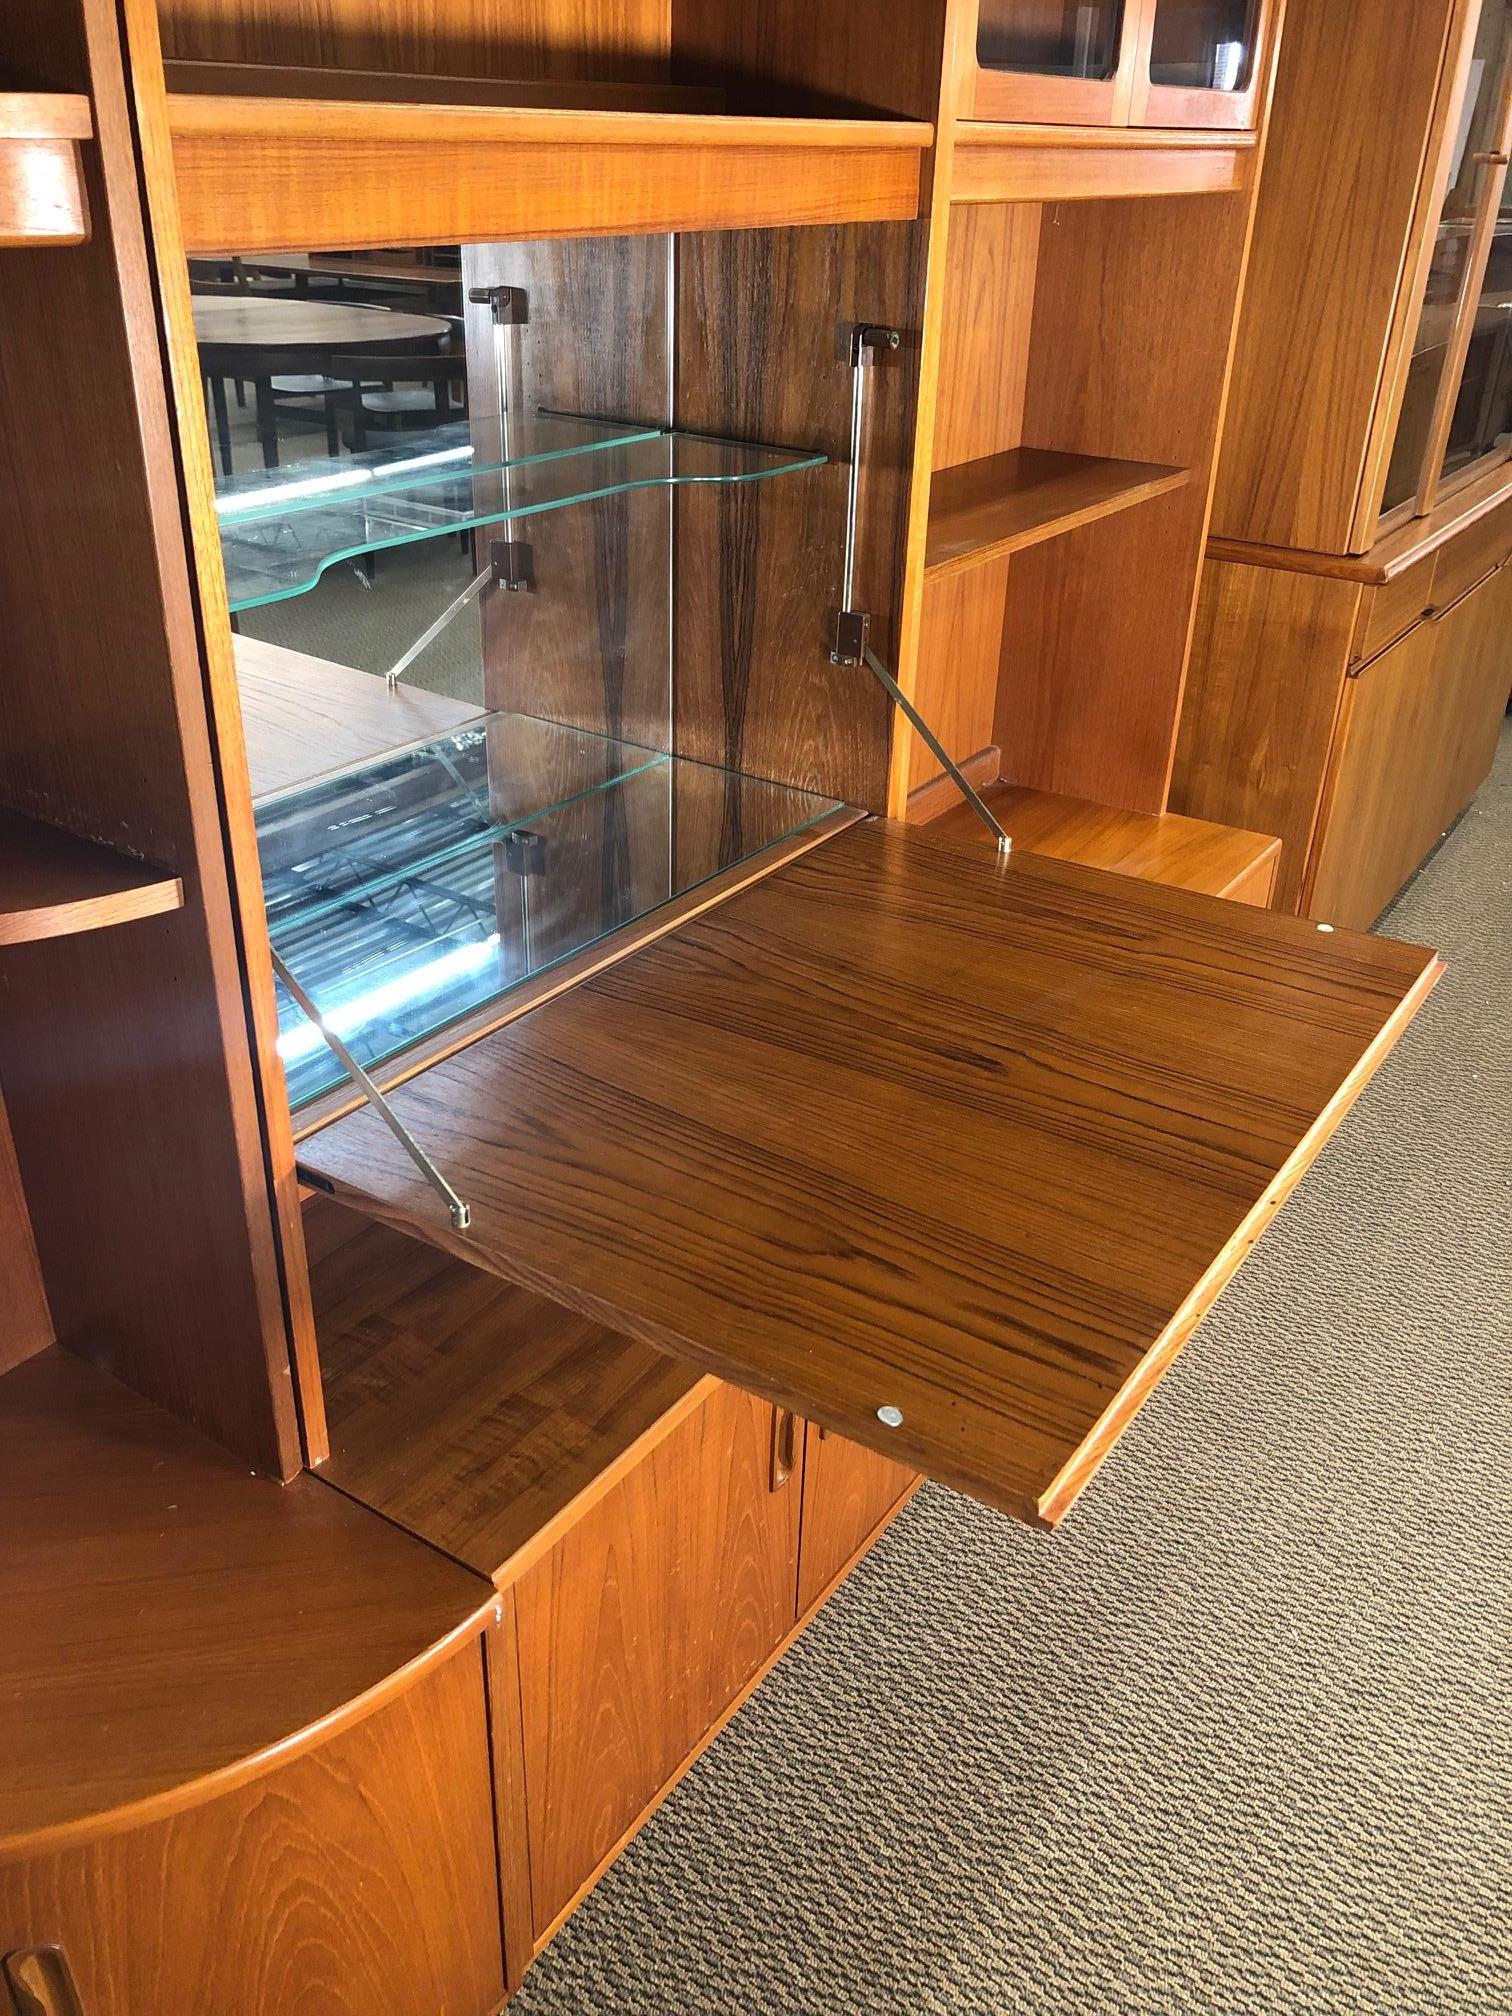 Fantastic teak wall unit made by G Plan. Made in England. It includes 2 base unit, 2 top units, 1 corner piece with top and bottom. Features 1 drop down unit that can be used as a bar. The base has 2 two-door cabinets. The shelves are